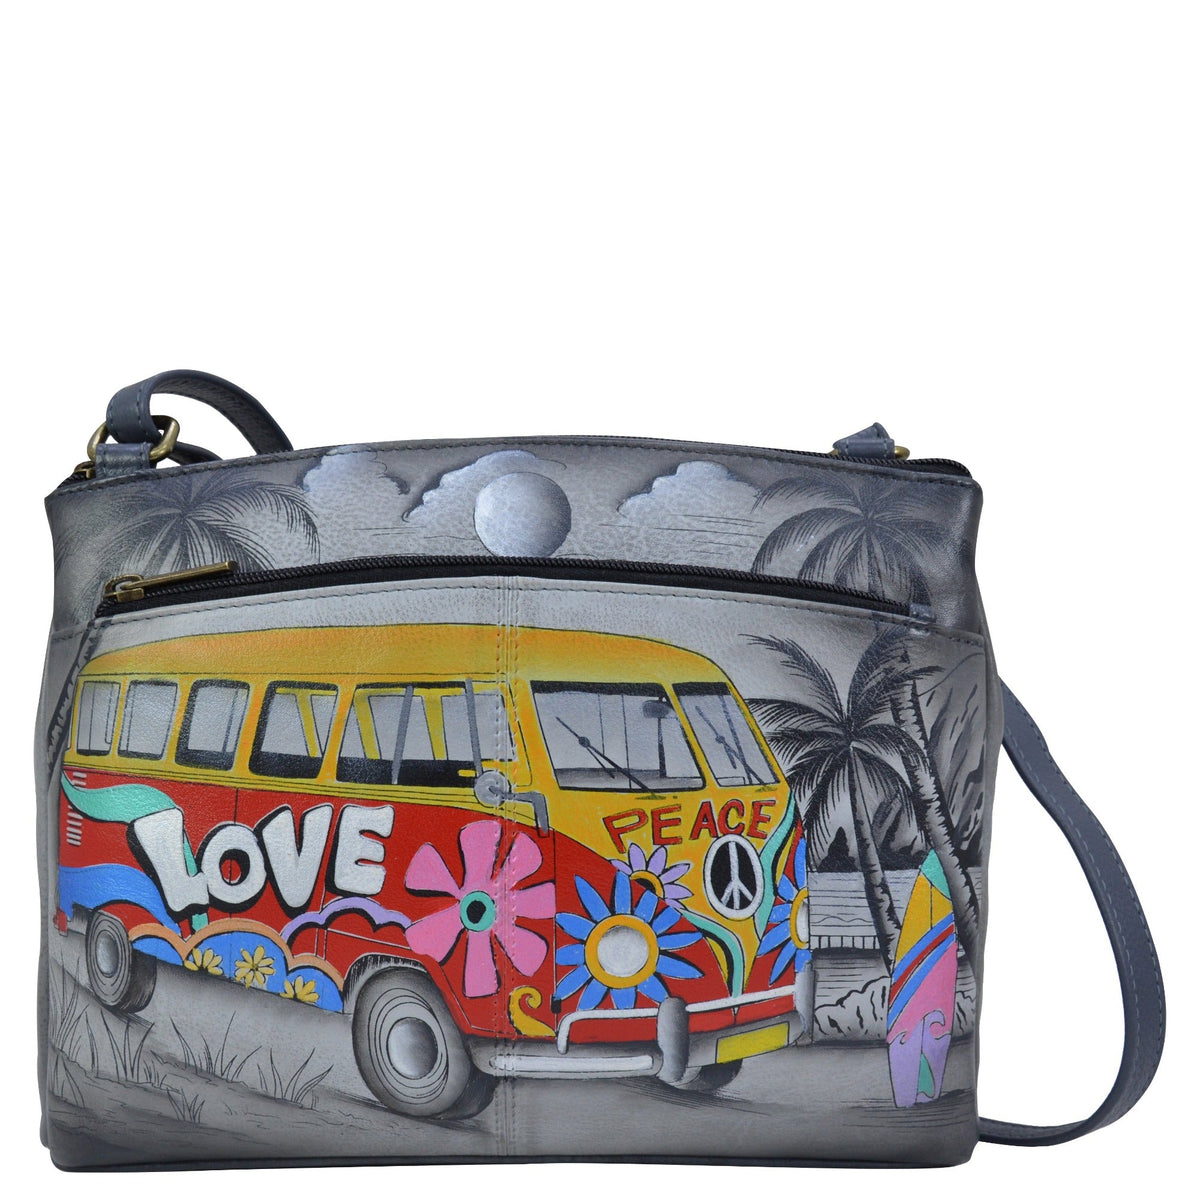 Anna by Anuschka style 8265, handpainted Cross Body Organizer. Happy Camper painting in grey color. Featuring magnetic snap button entry to central compartment, Fits tablet, Fits E-Reader, Built-in organizer.